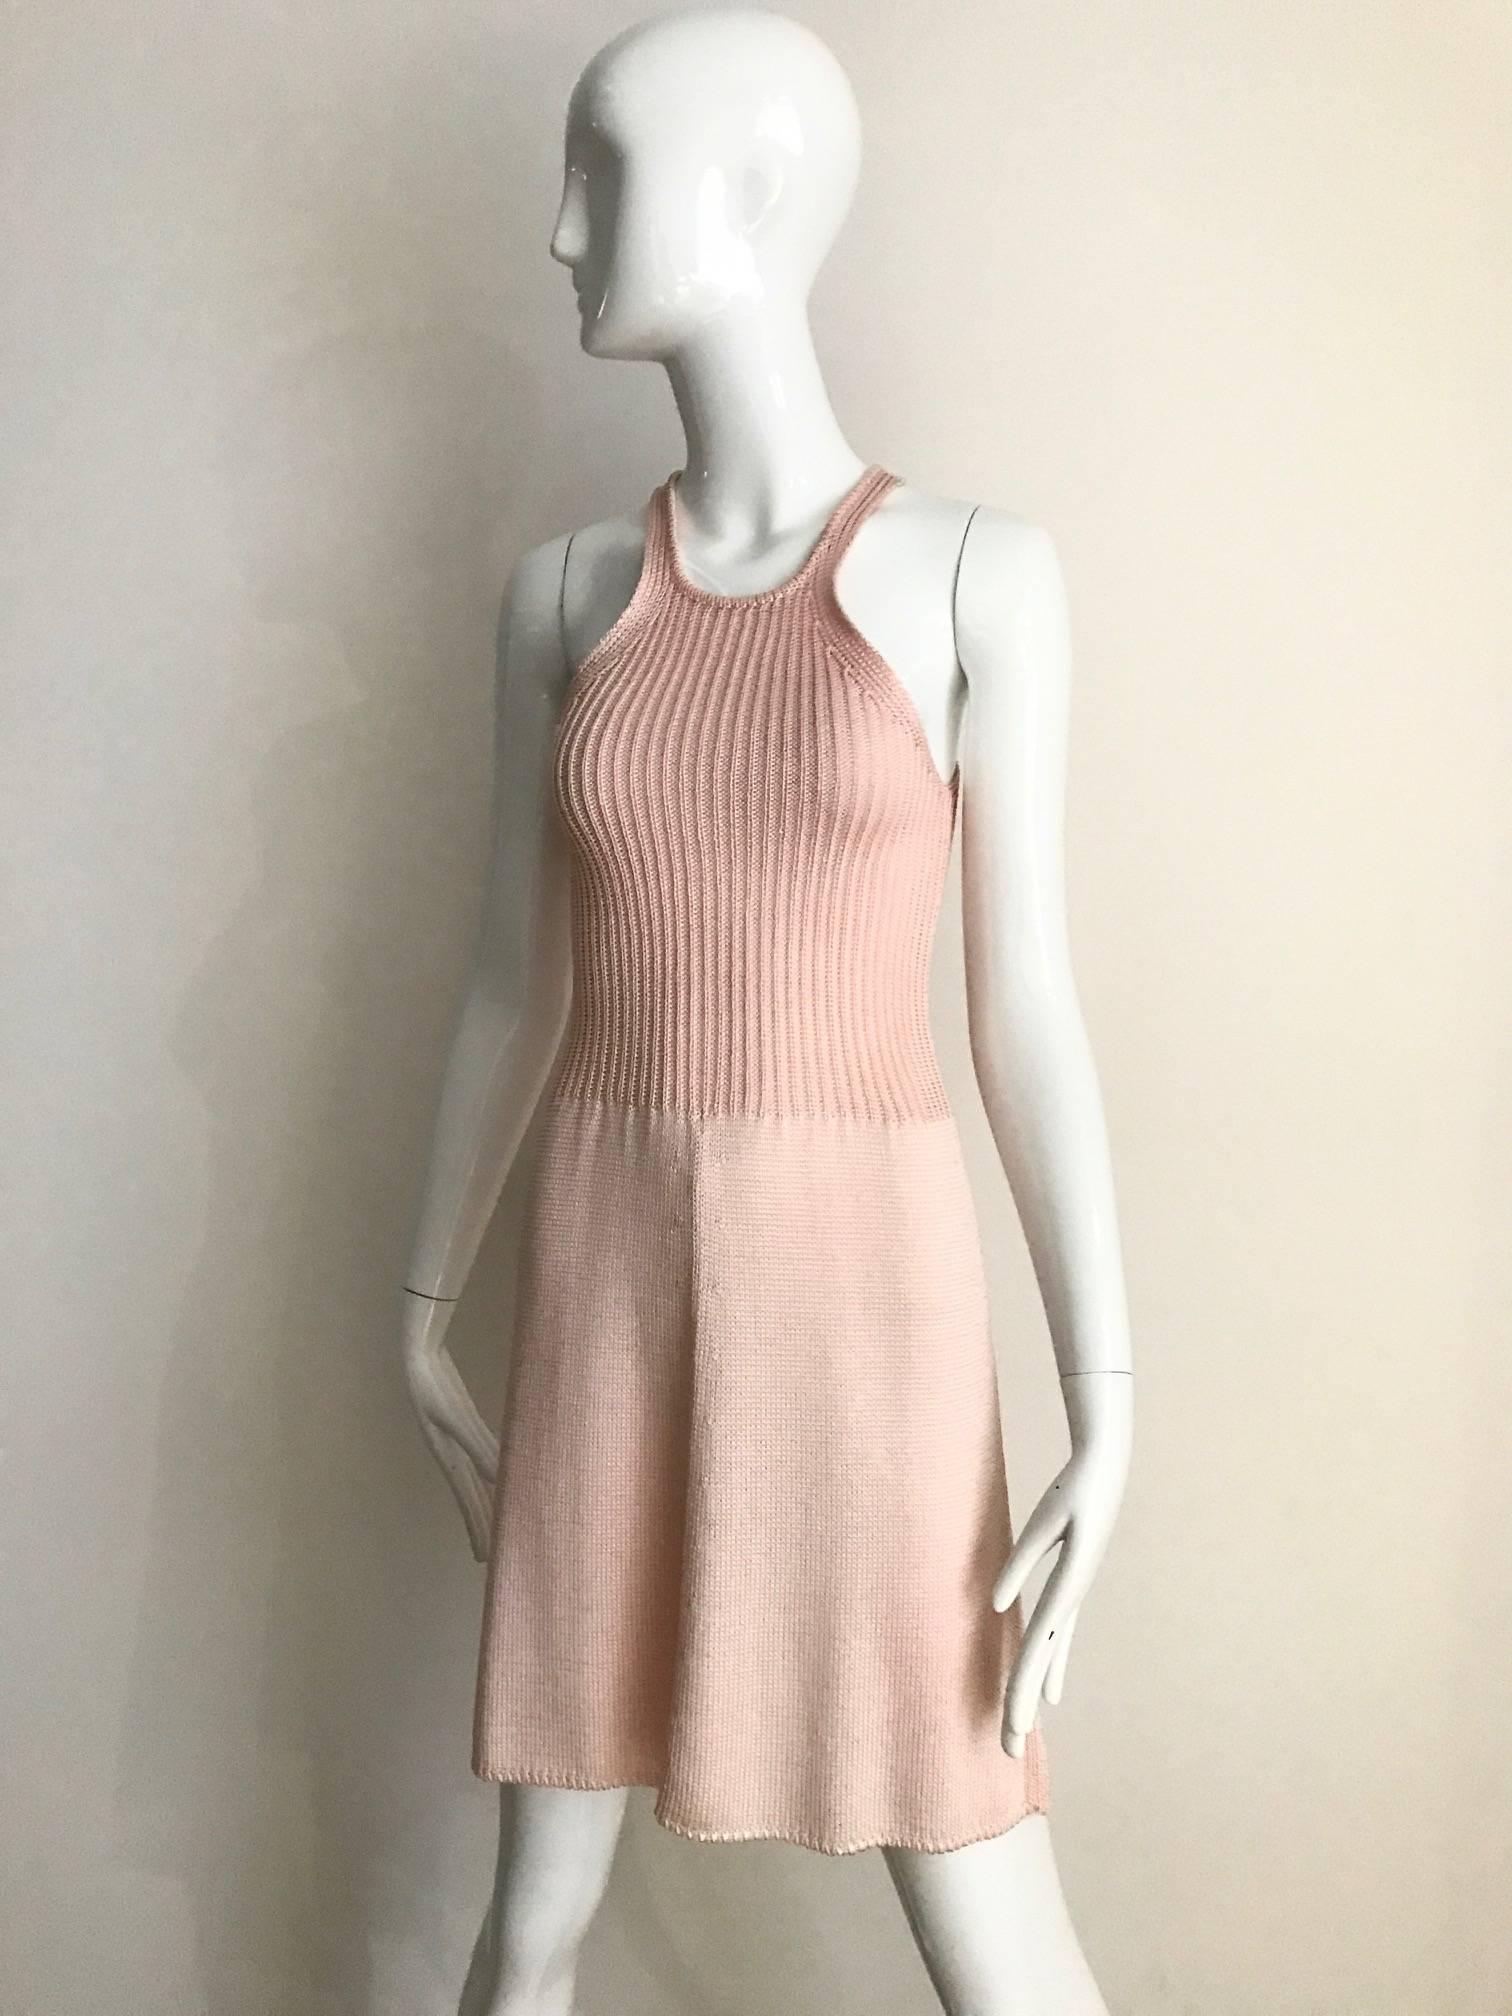 90s KRIZIA Pink Racer Back Mini knit Dress In Excellent Condition For Sale In Beverly Hills, CA